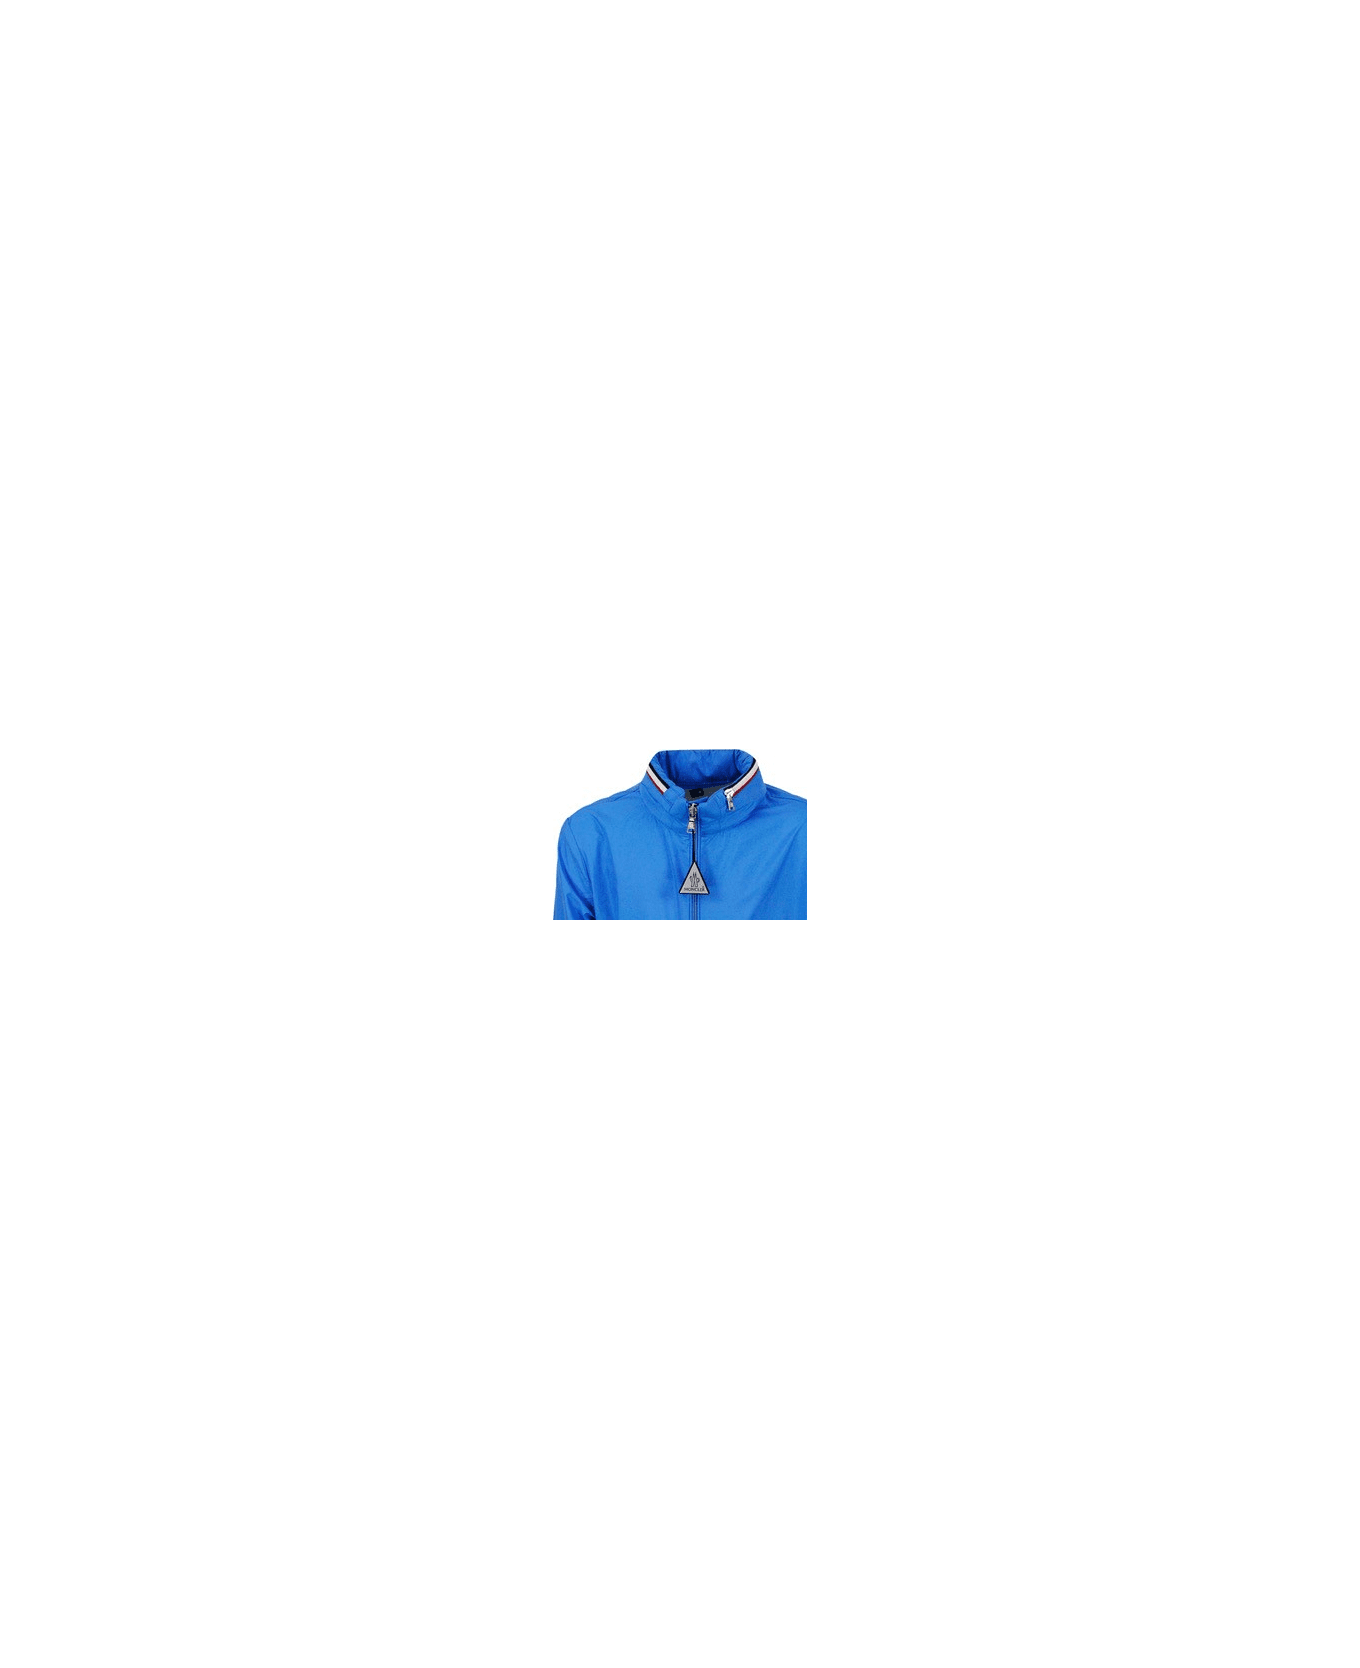 Moncler Windproof Farlak Jacket With Concealed Hood And Zip Closure - Light Blu